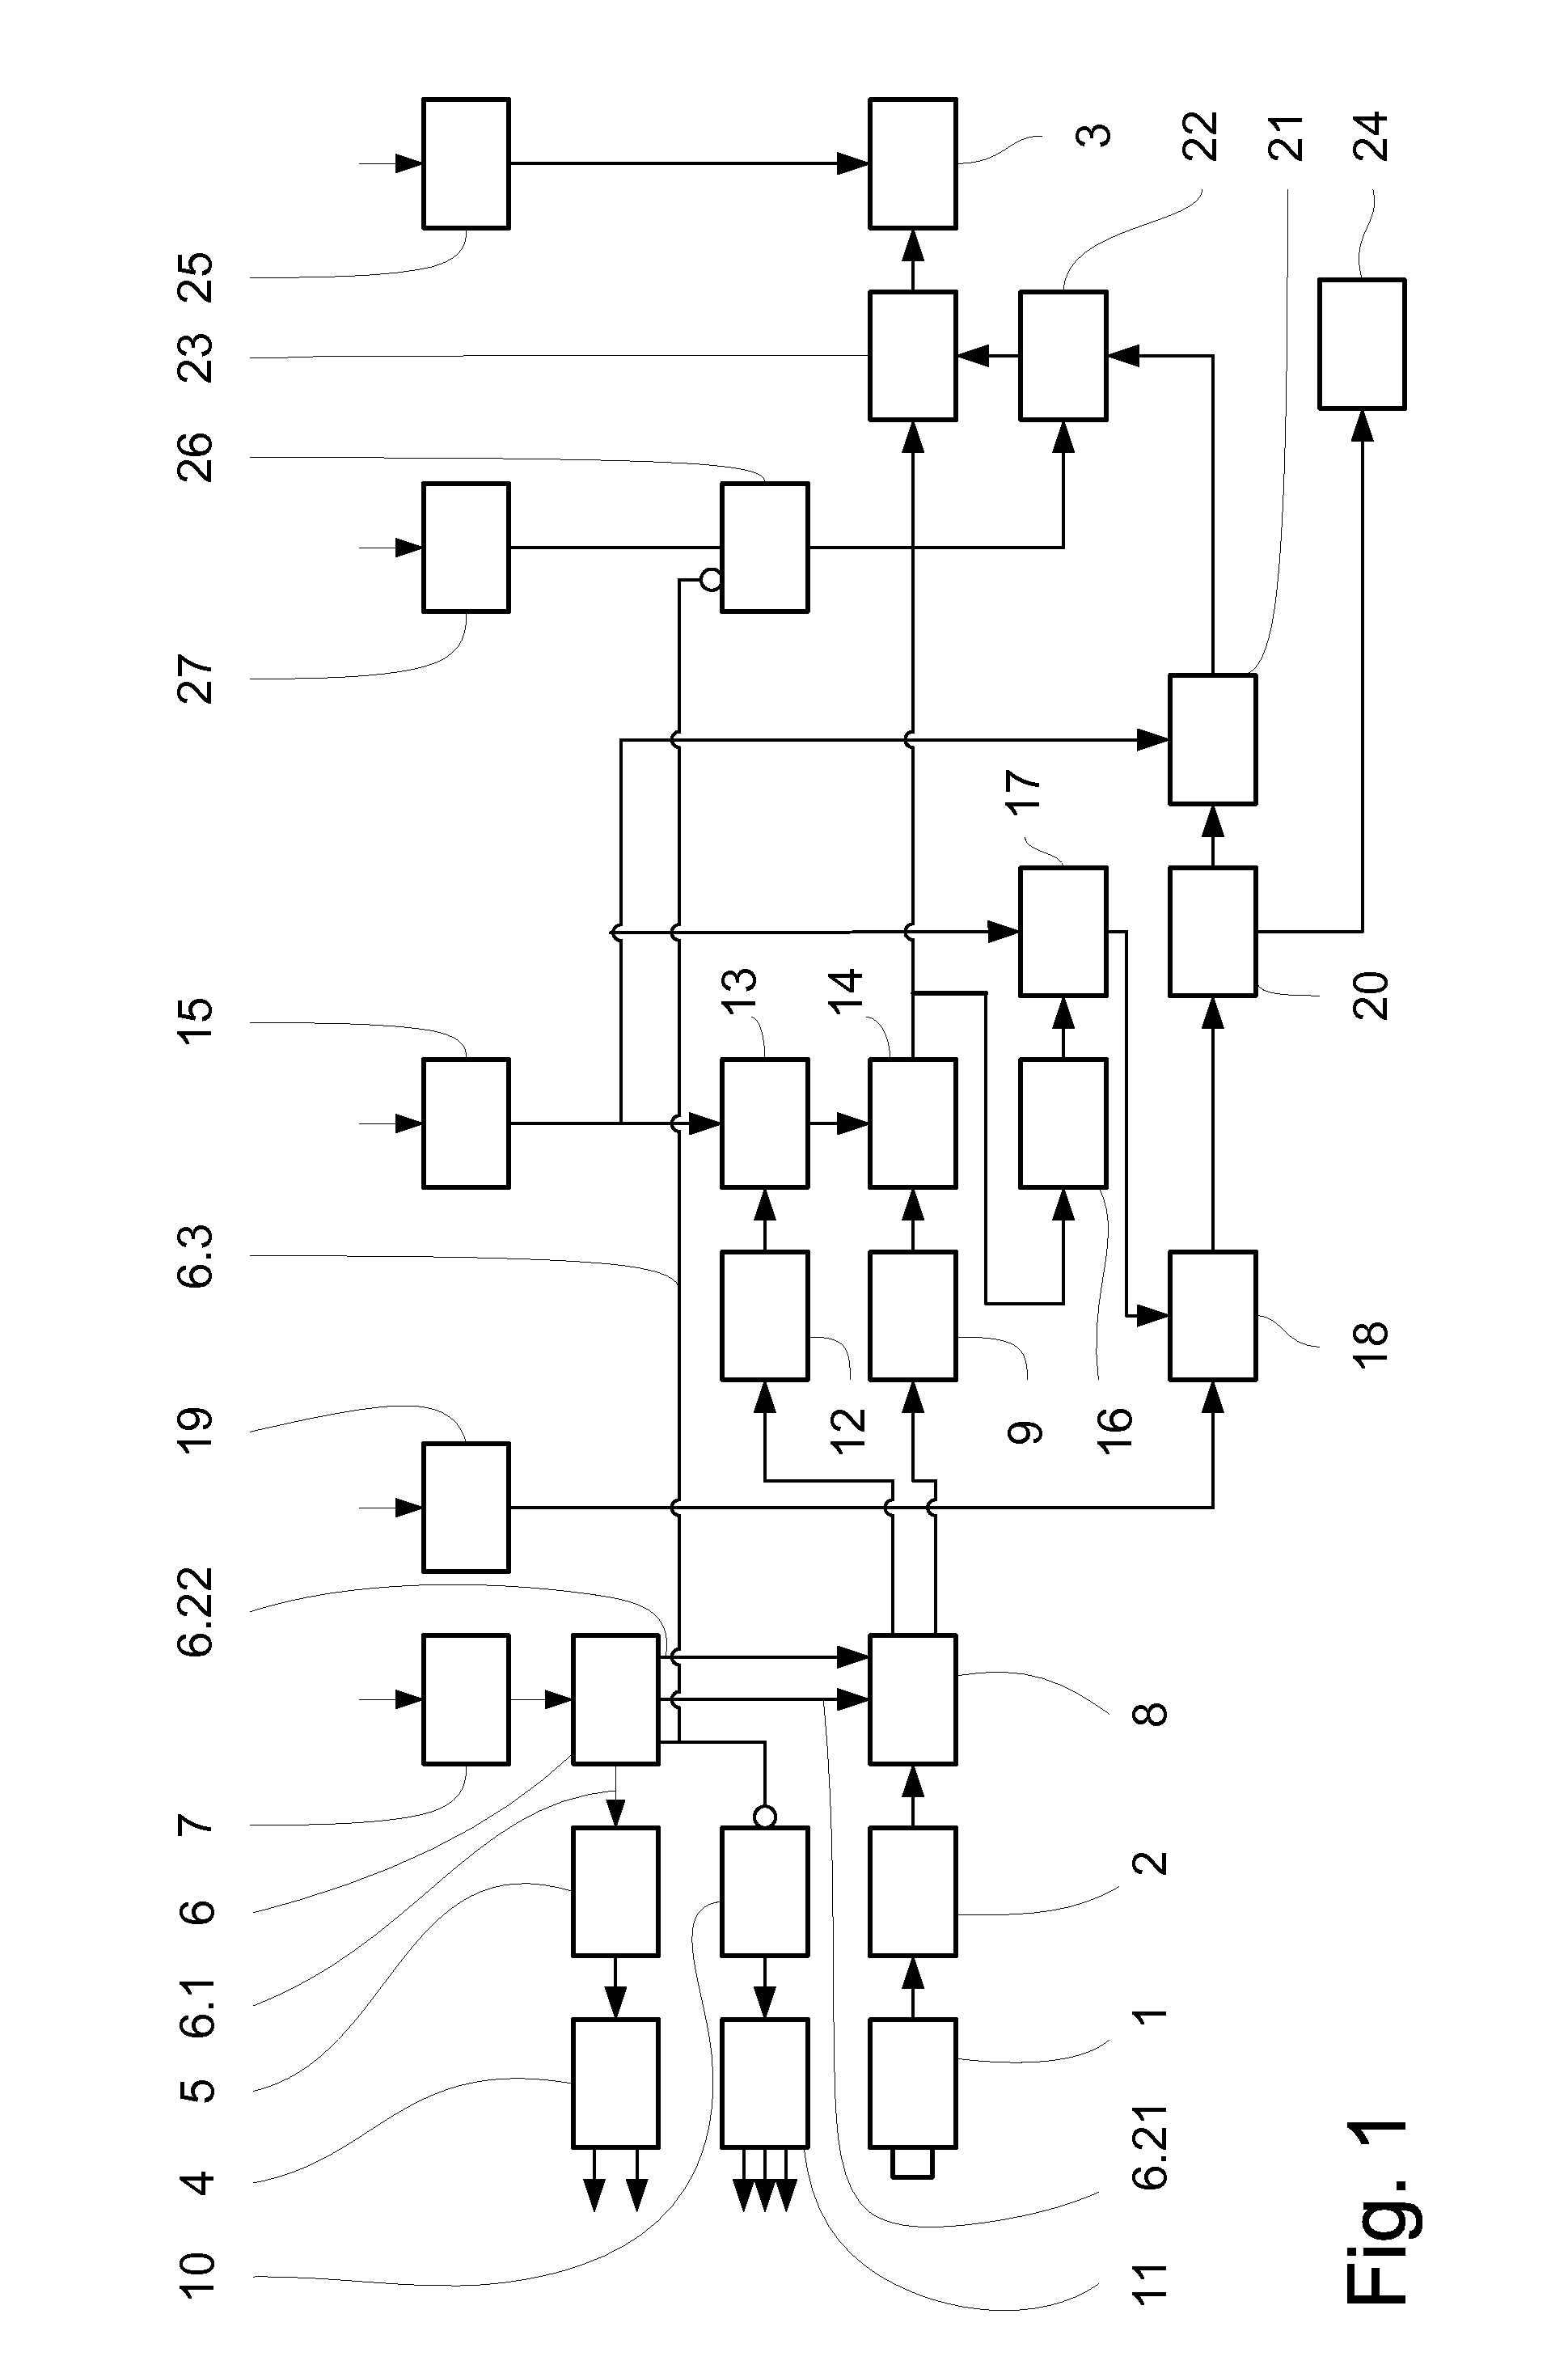 Image processing system having an additional piece of scale information to be processed together with the image information